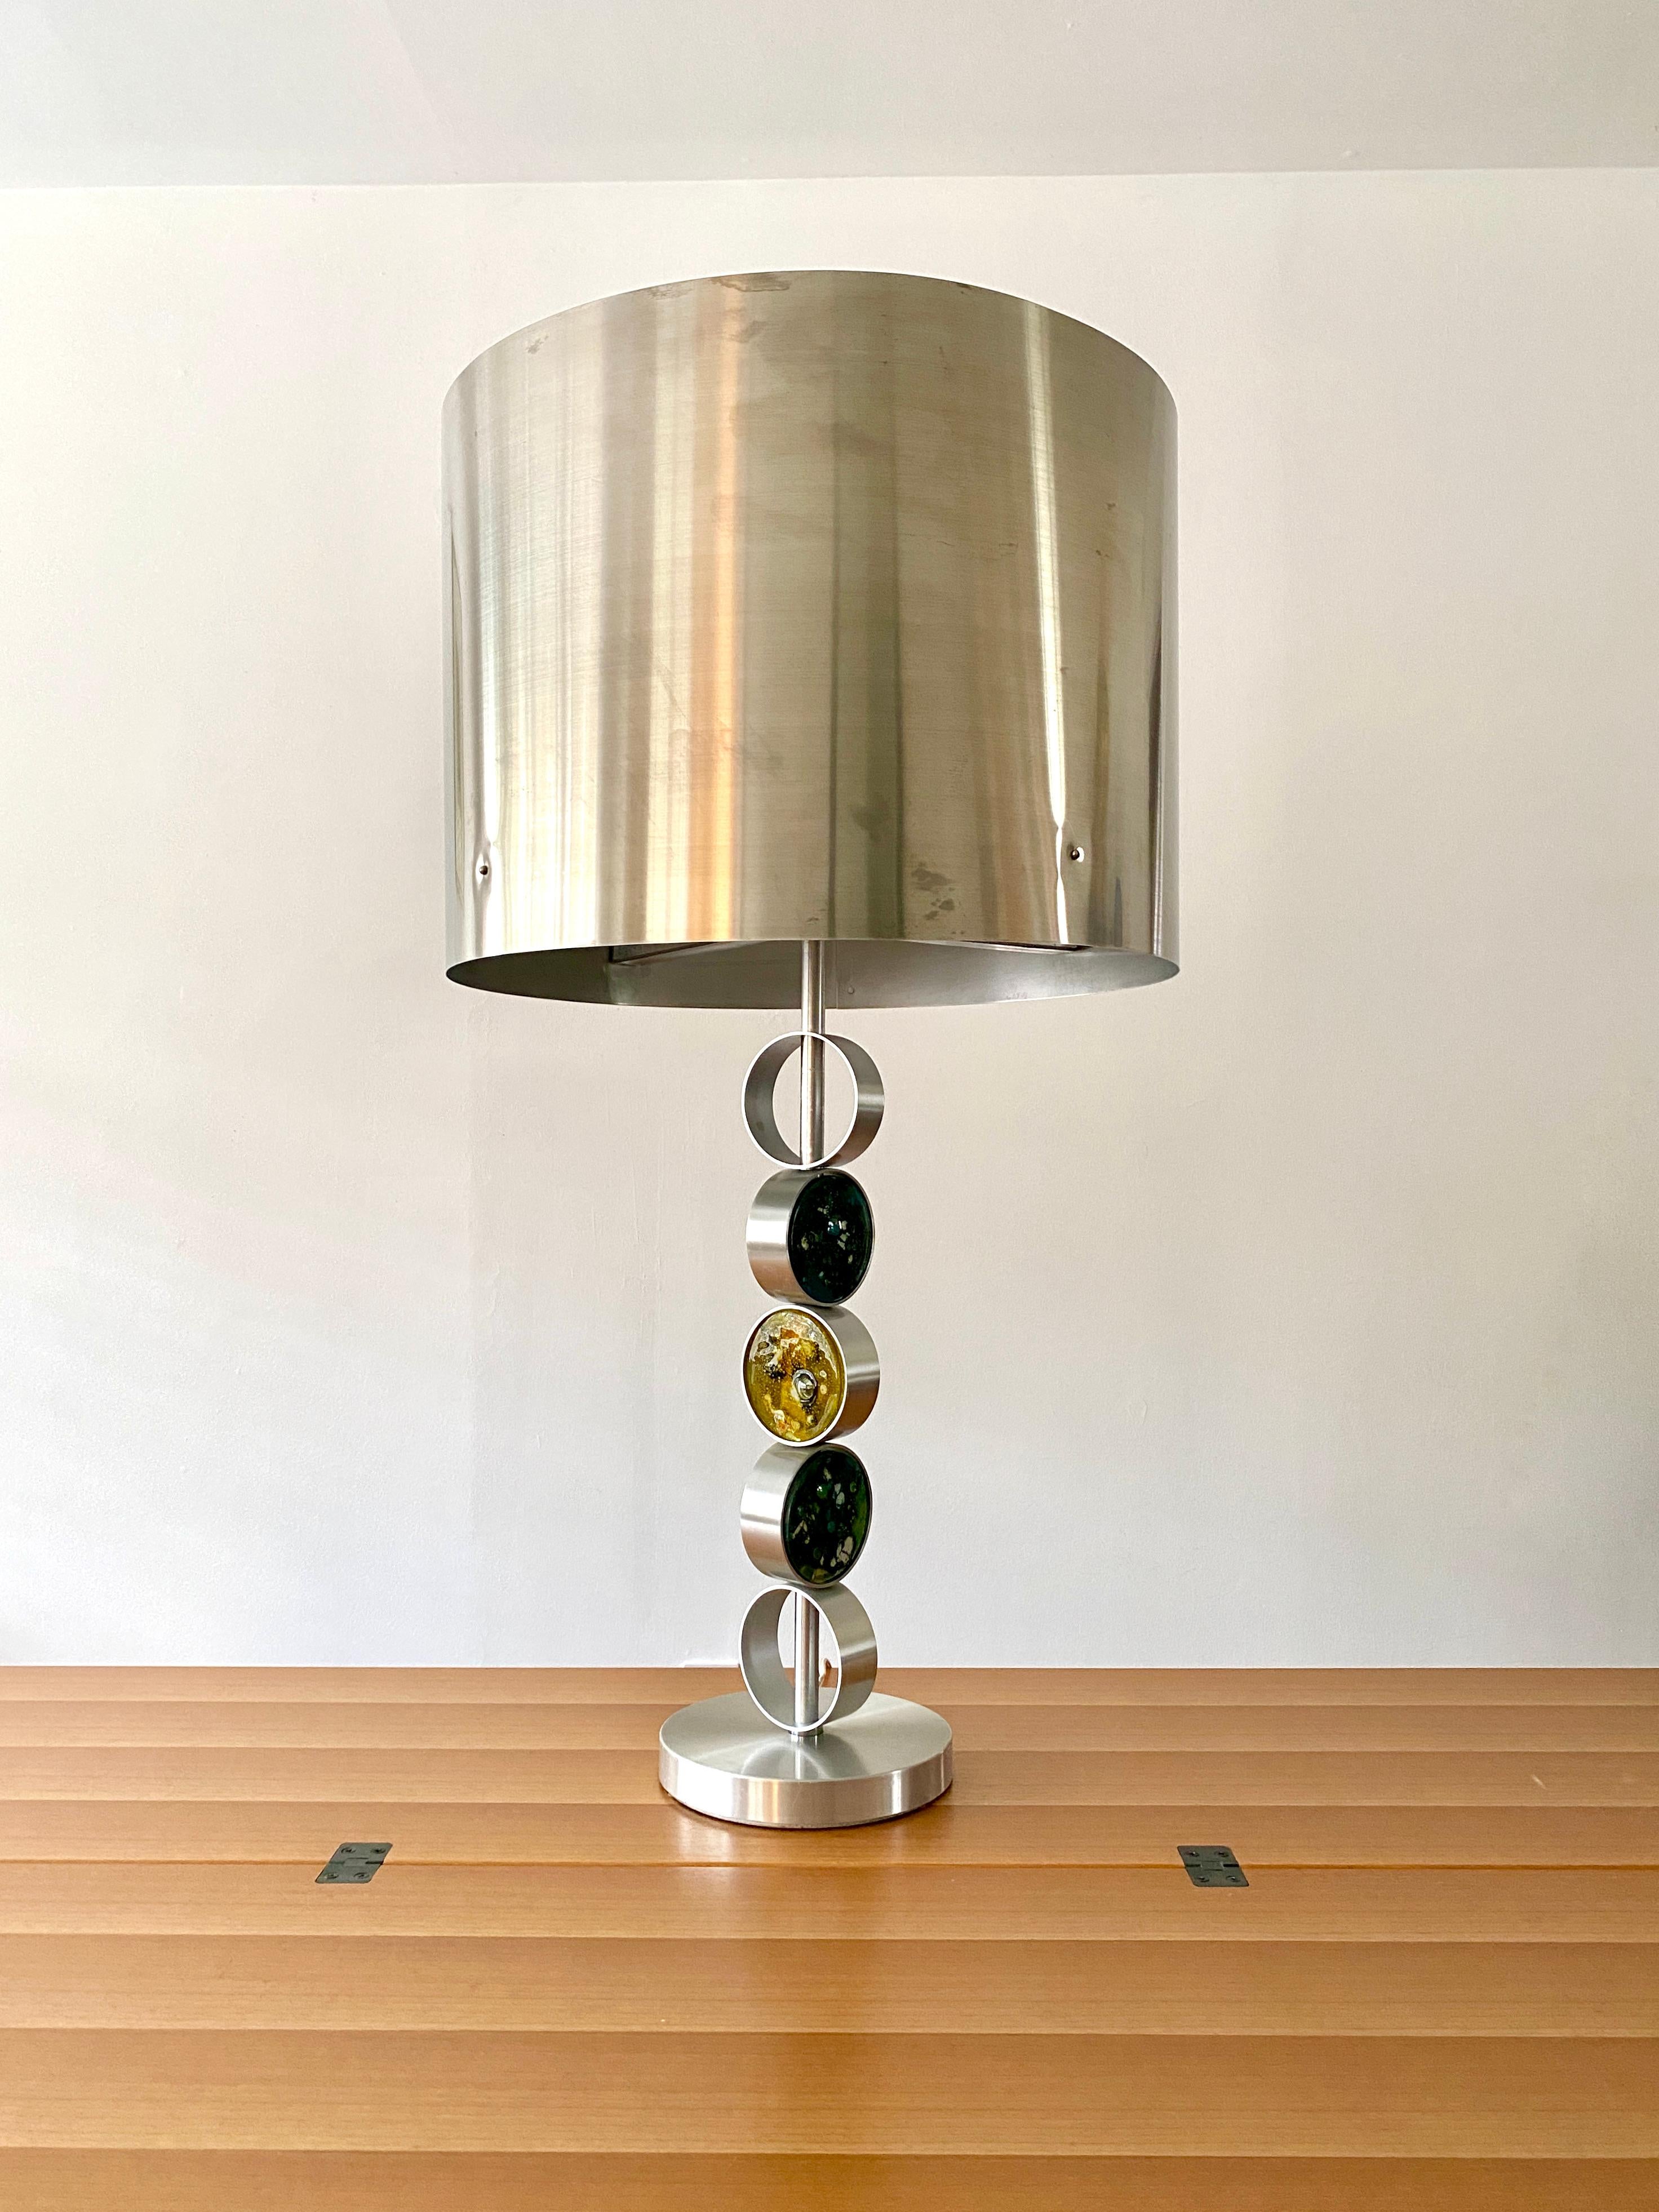 A large aluminum and steel table lamp with three art glass rondels by Finnish designer Nanny Still. The lamp was manufactured by RAAK Lighting Company in the Netherlands, designed in 1972 and is model number D2095. The lamp is in the brutalish /